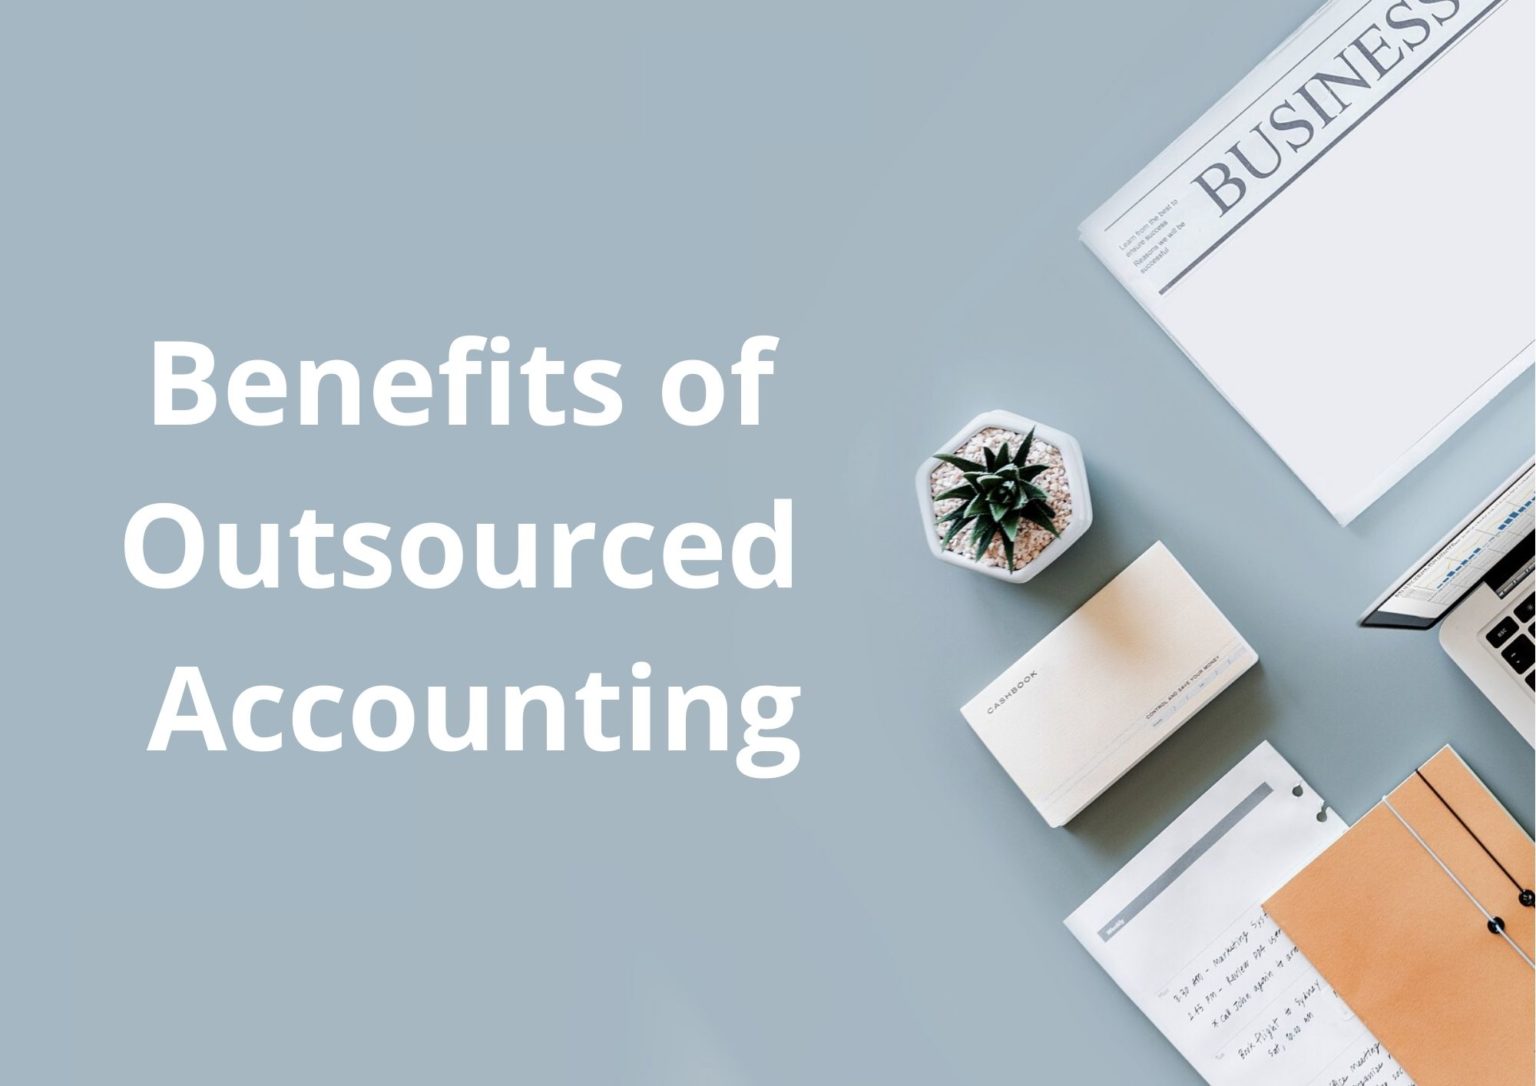 8 Benefits of Outsourced Accounting